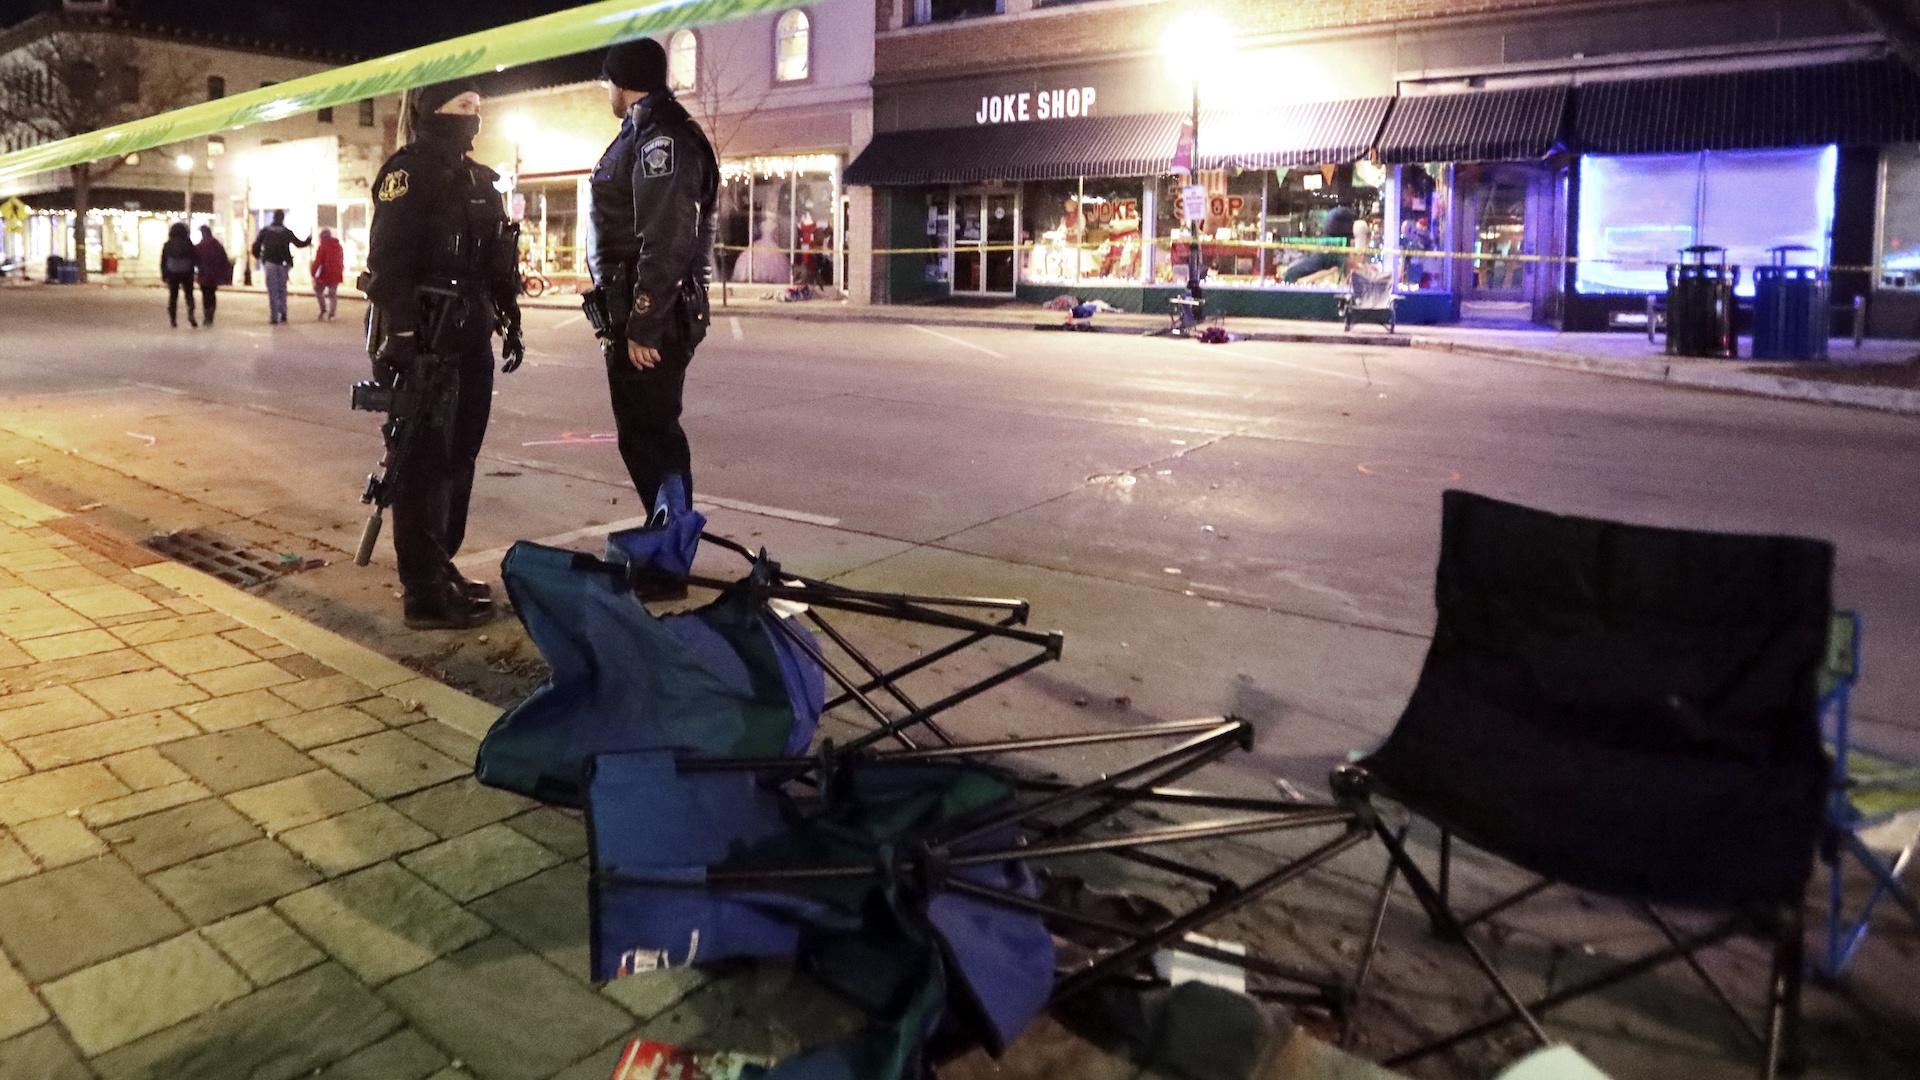 Police stand near toppled chairs lining W. Main St. in downtown Waukesha, Wis., after an SUV drove into a parade of Christmas marchers, Sunday, Nov. 21, 2021. (John Hart/Wisconsin State Journal via AP)